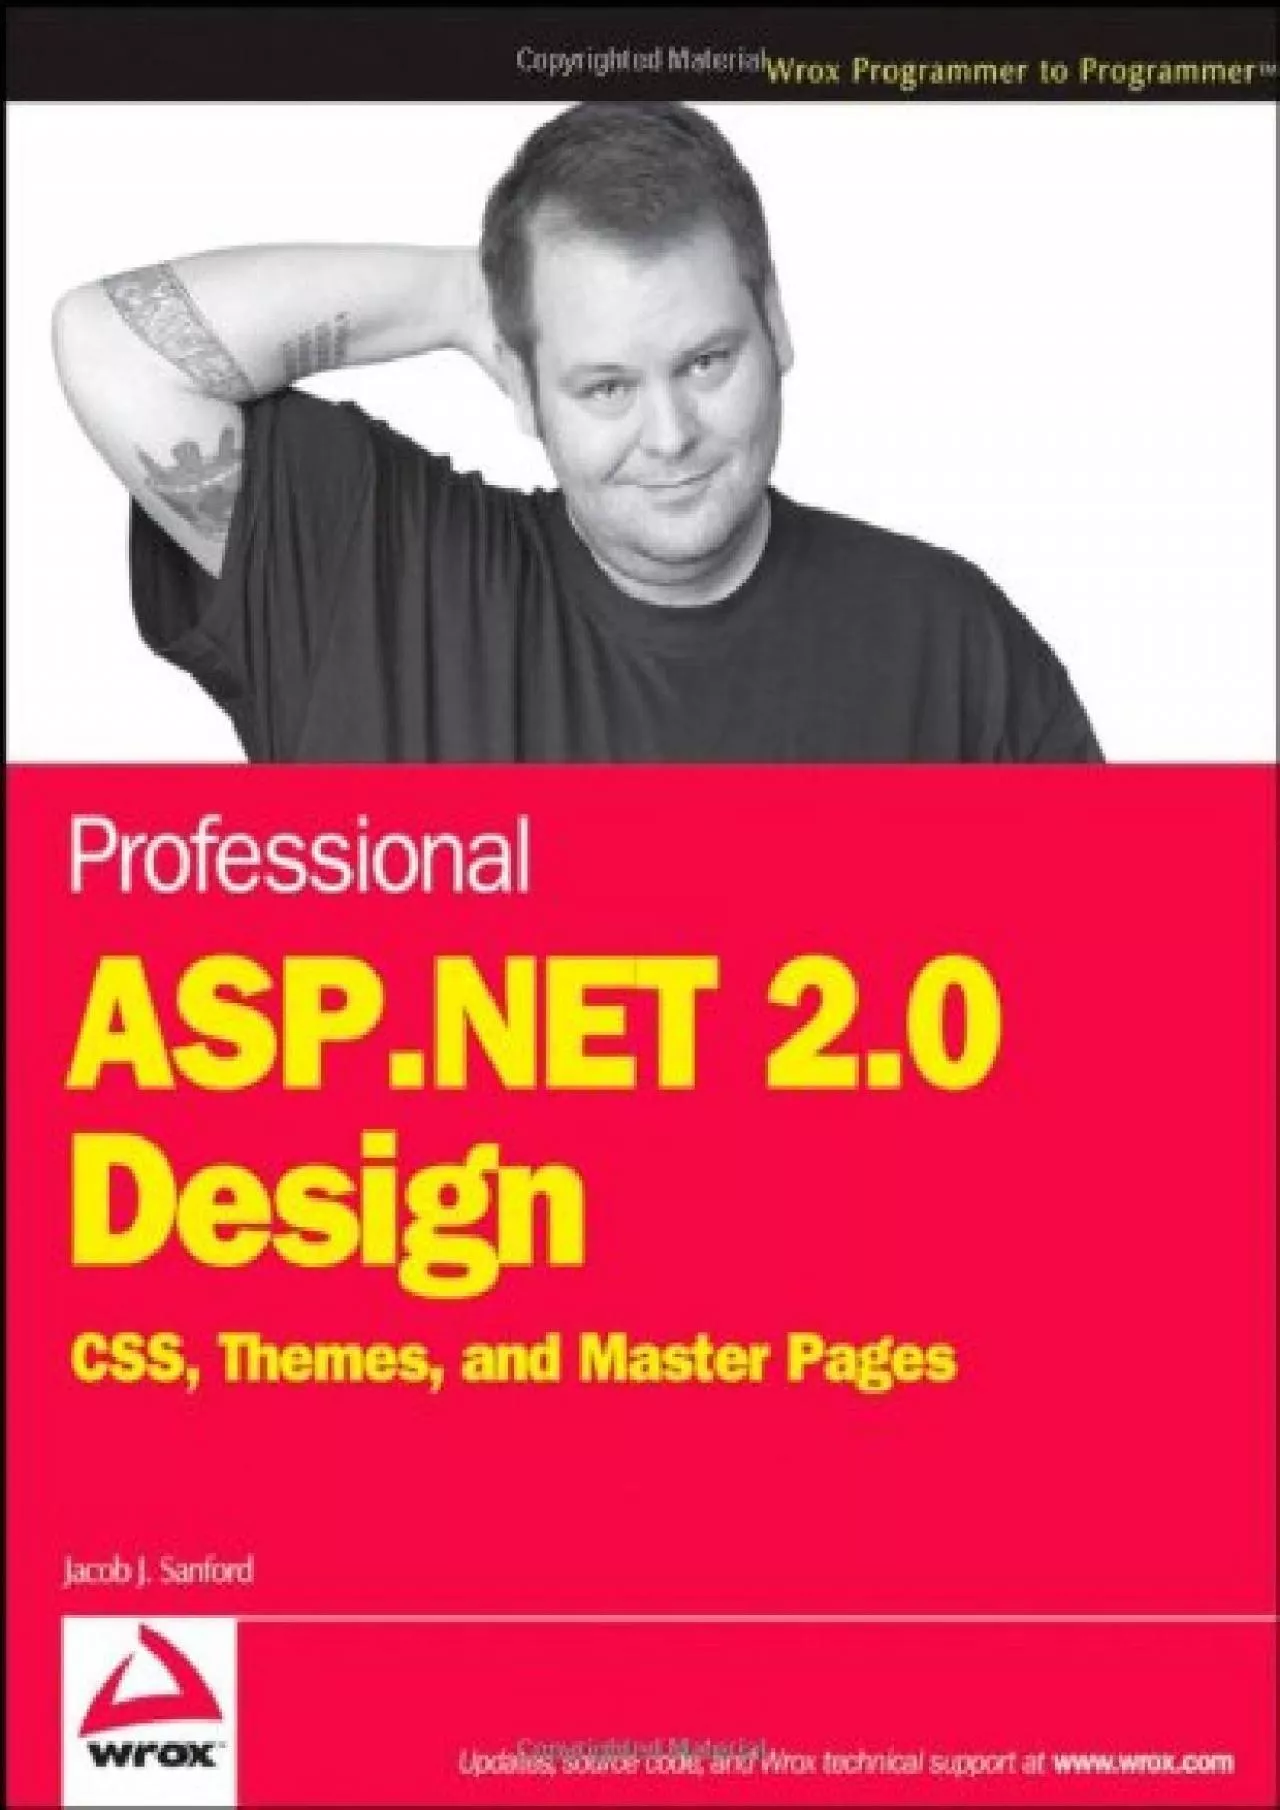 [eBOOK]-Professional ASP.NET 2.0 Design: CSS, Themes, and Master Pages